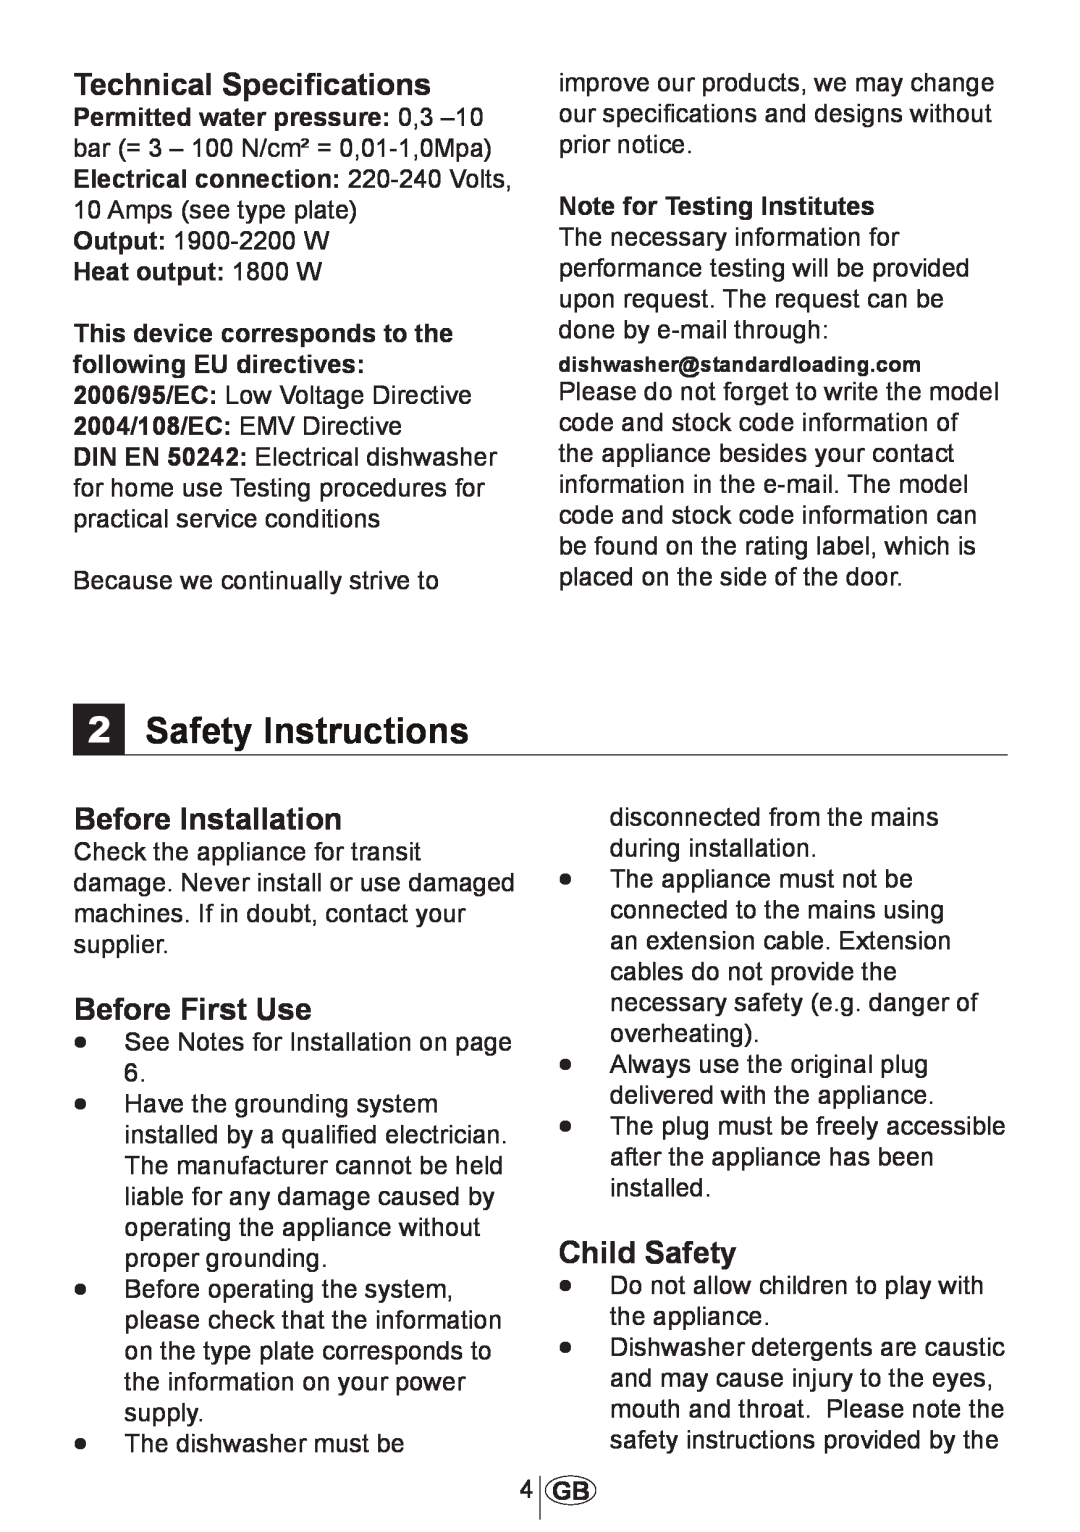 Beko 3905 MI Safety Instructions, Technical Specifications, Before Installation, Before First Use, Child Safety 